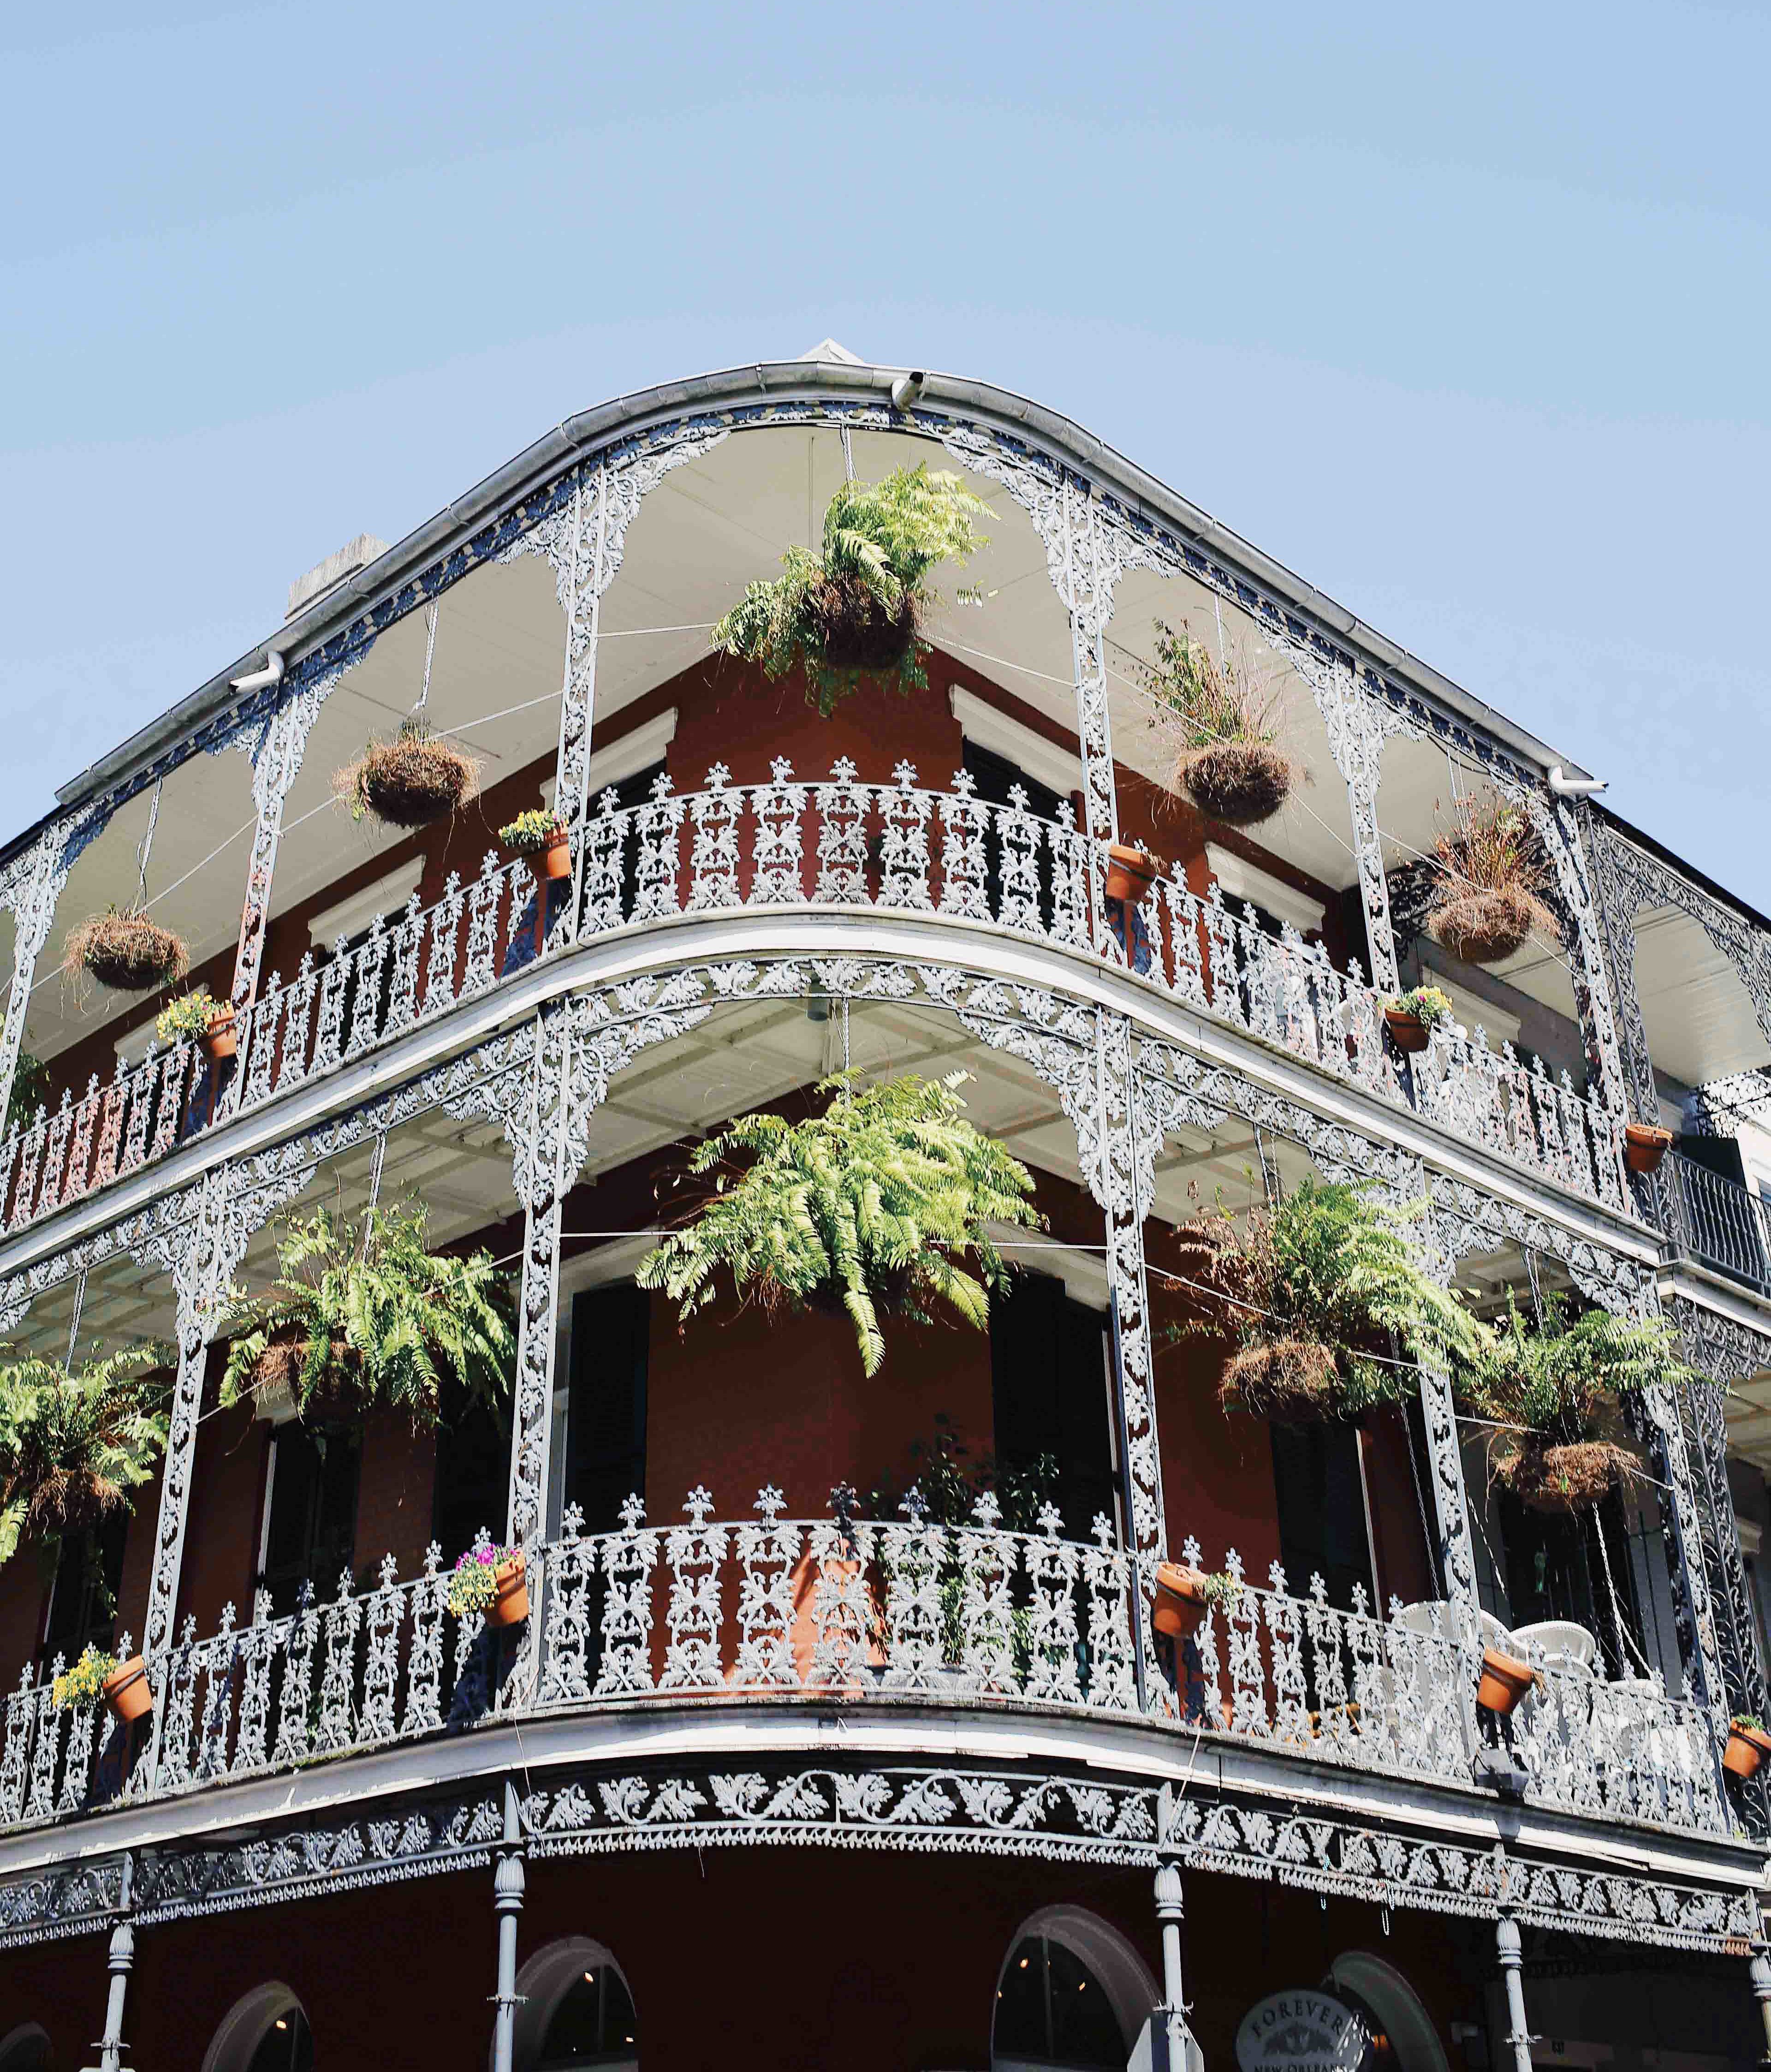 Urban Jungle Spanish architecture visit of the French Quarter in New Orleans - Visit of the French Quarter in New Orleans - Horse French Quarter New Orleans Travel Guide - NOLA City guide - by fashion blogger Julia Comil